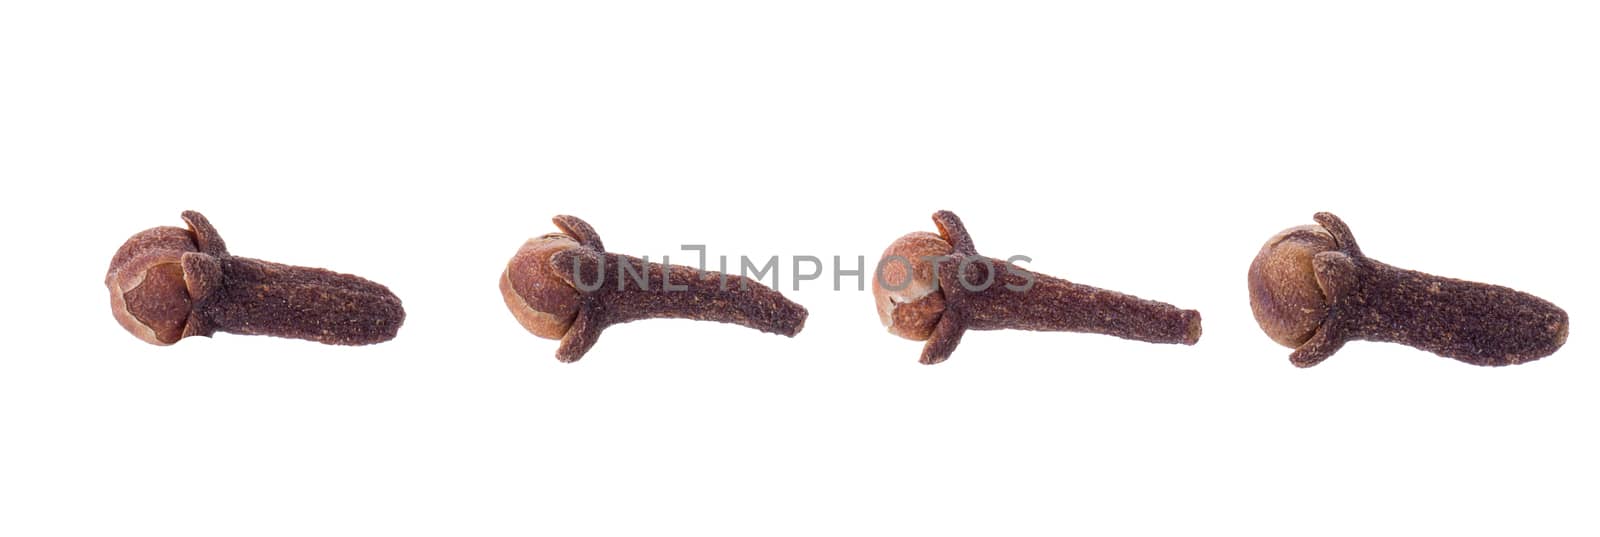 Clove spice closeup isolated on a white background by kaiskynet